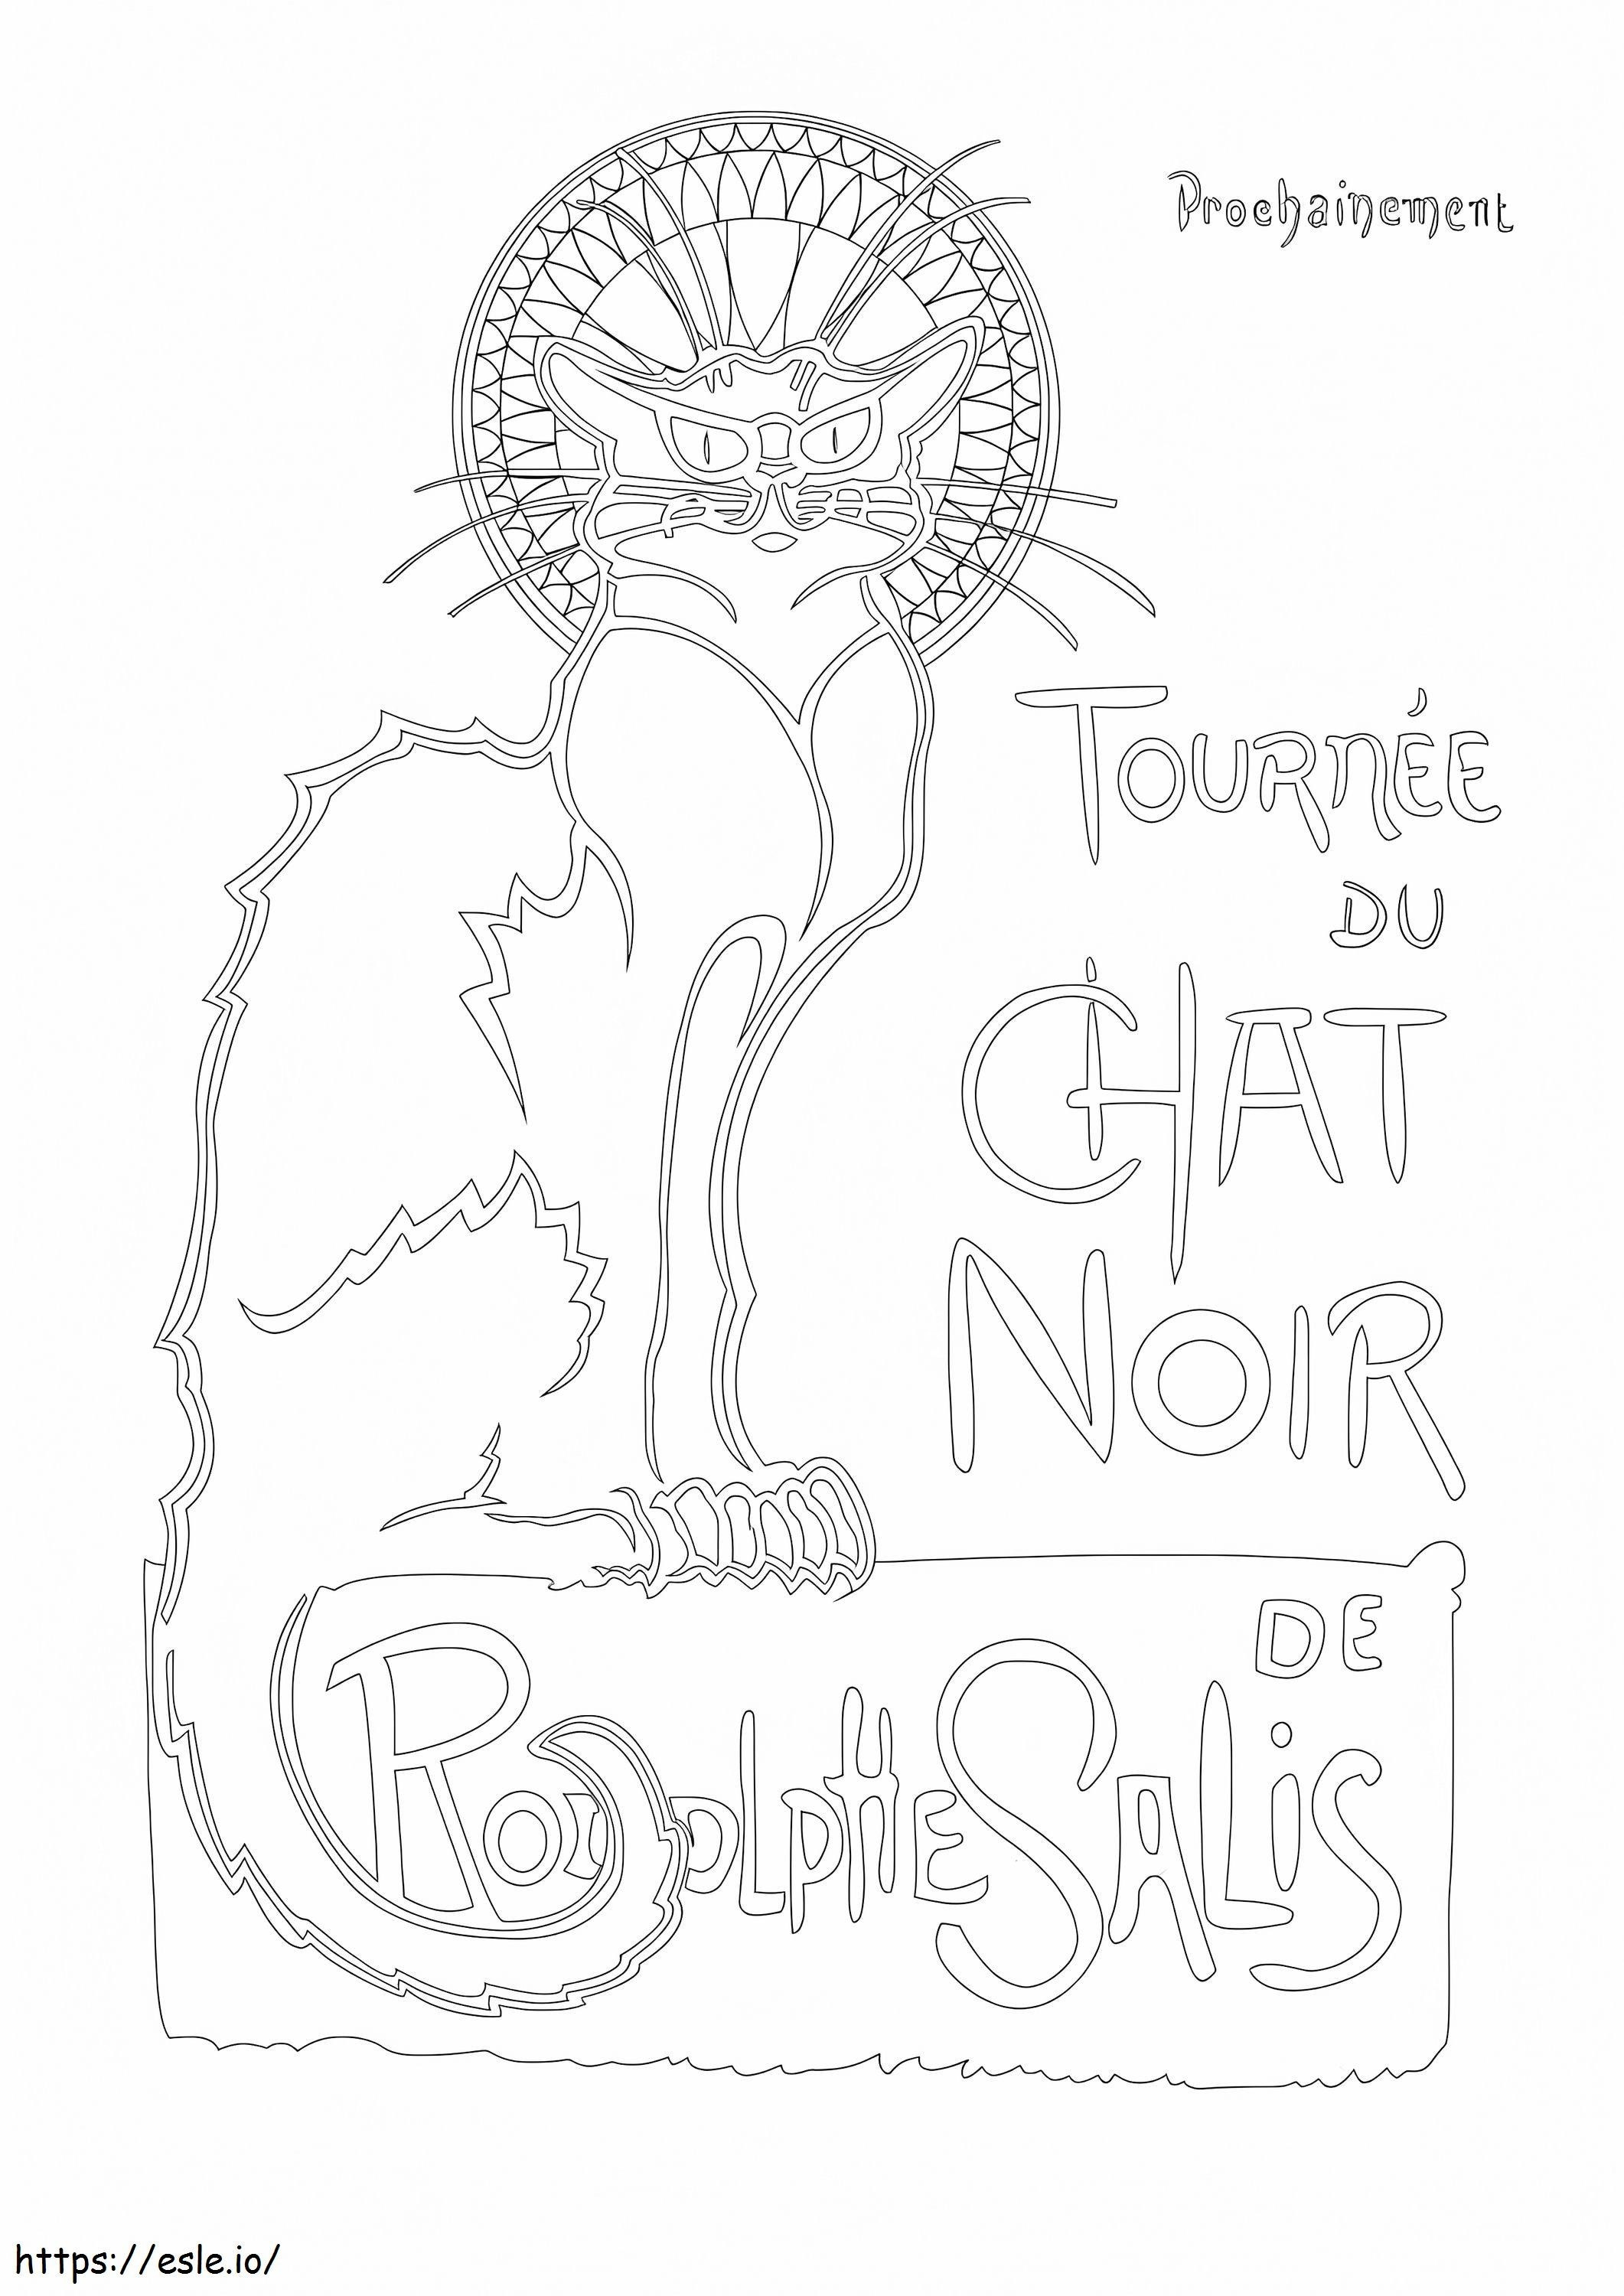 The Vintage Black Cat coloring page